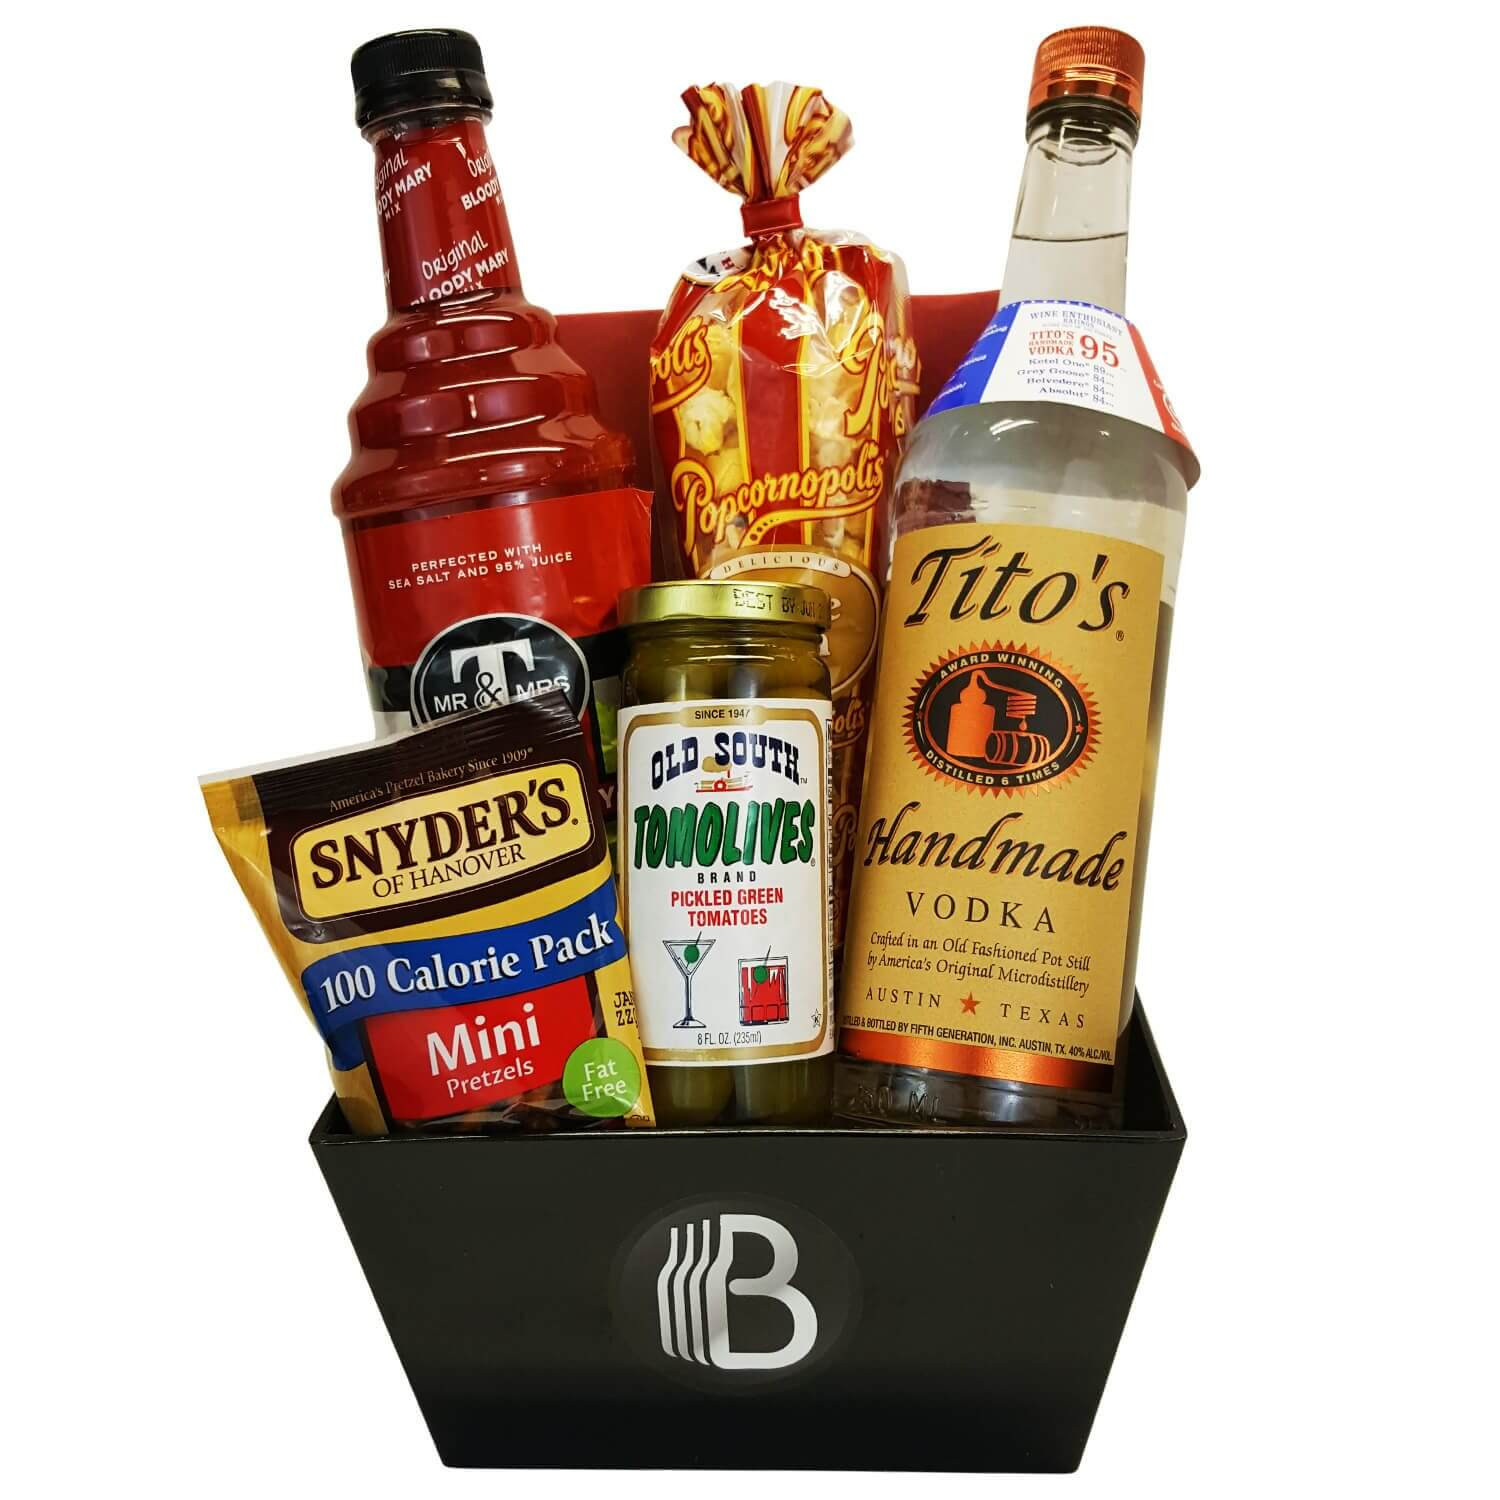 Bloody Mary Gift Basket Ideas
 The Bloody Mary Gift Basket The BroBasket